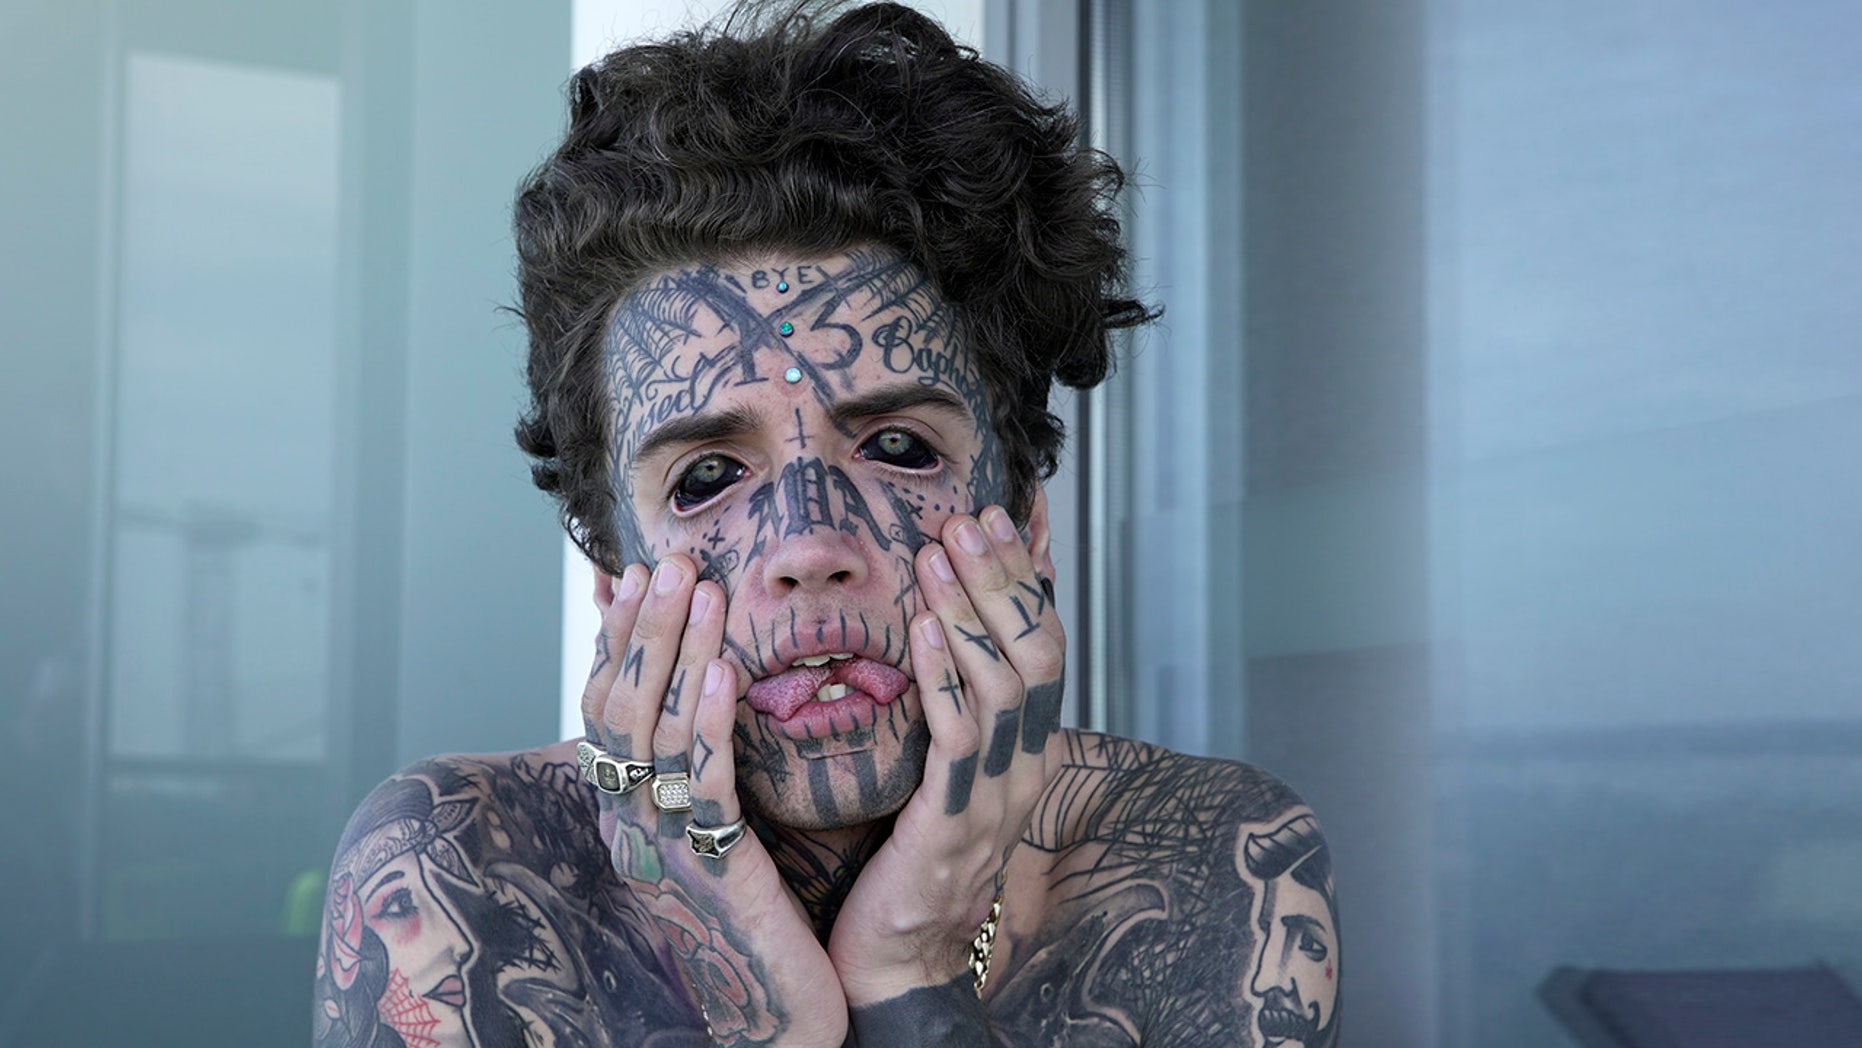 Ethan Bramble, from Melbourne, Australia has had a string of body modifications including getting his tongue split, the removal of his belly button and even tattooing his eyeballs black. (Alana Tompson / Barcroft Images / Barcroft Media via Getty Images)